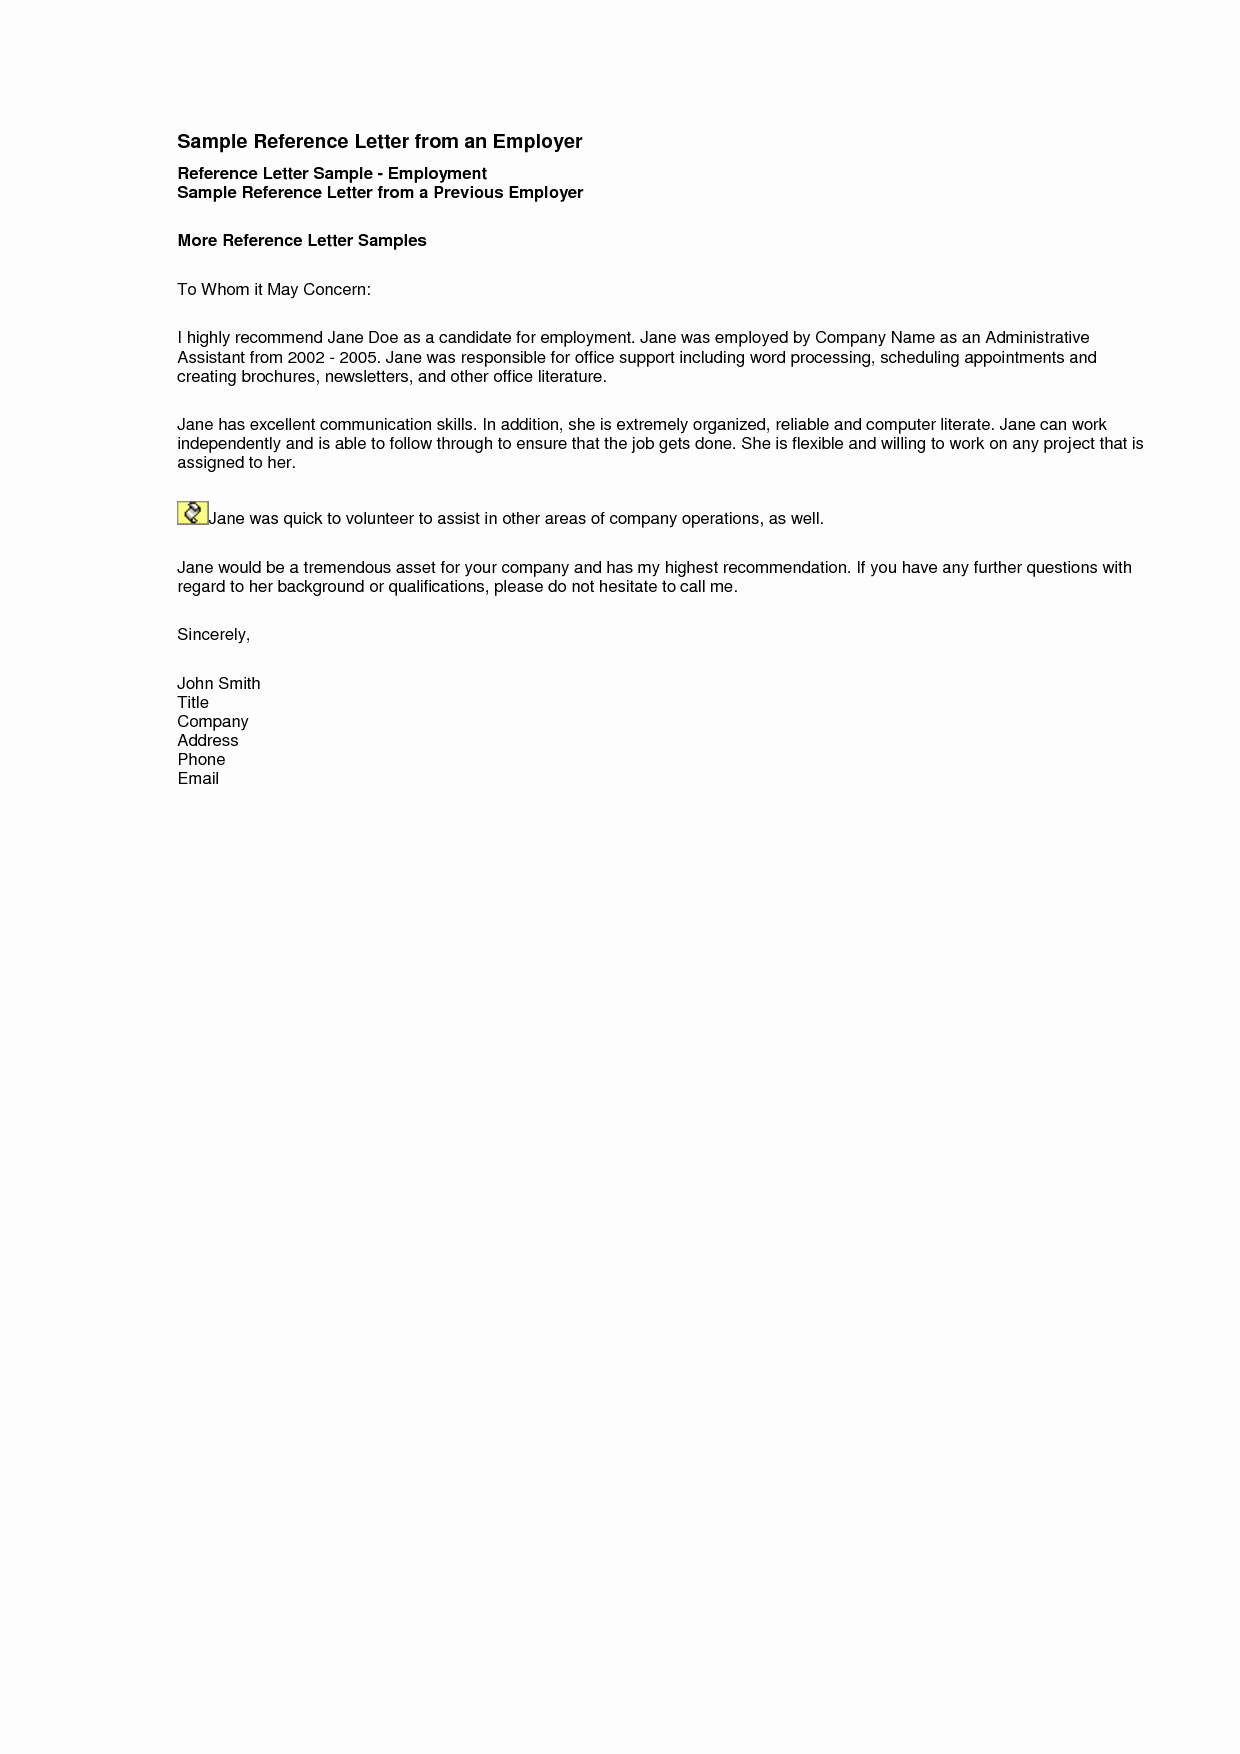 Employment Letters Of Recommendation Samples Awesome Sample Reference Letter for Employment